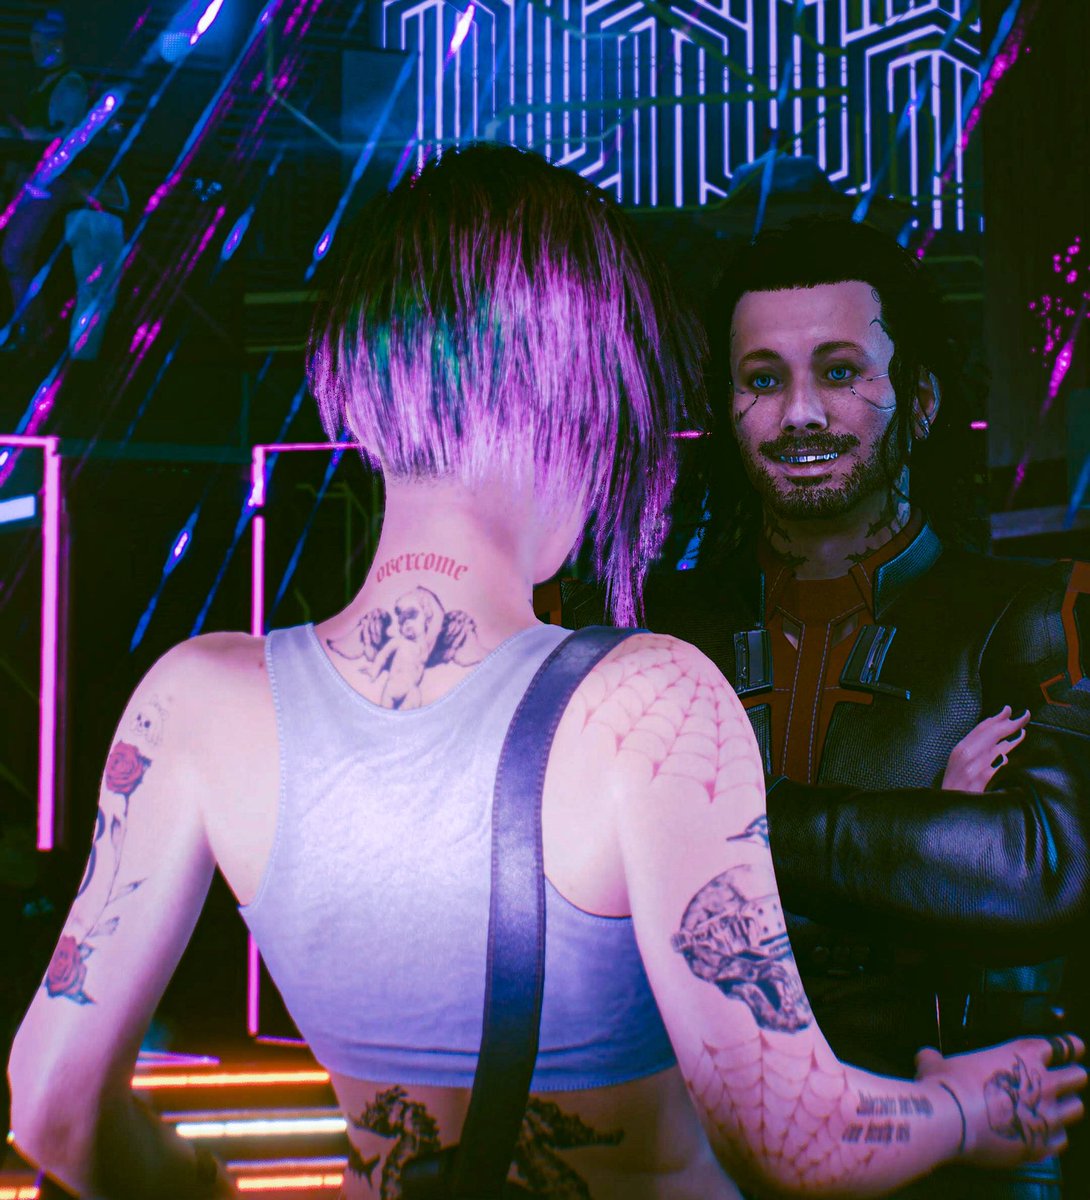 Sup, you come here often? 😏 Me trying (unsuccessfully) to flirt with Judy at Lizzie’s Bar 😅 #CyberMondays #Cyberpunk2077 #Cyberpunk2077PhotoMode #VirtualPhotography #PS5Share